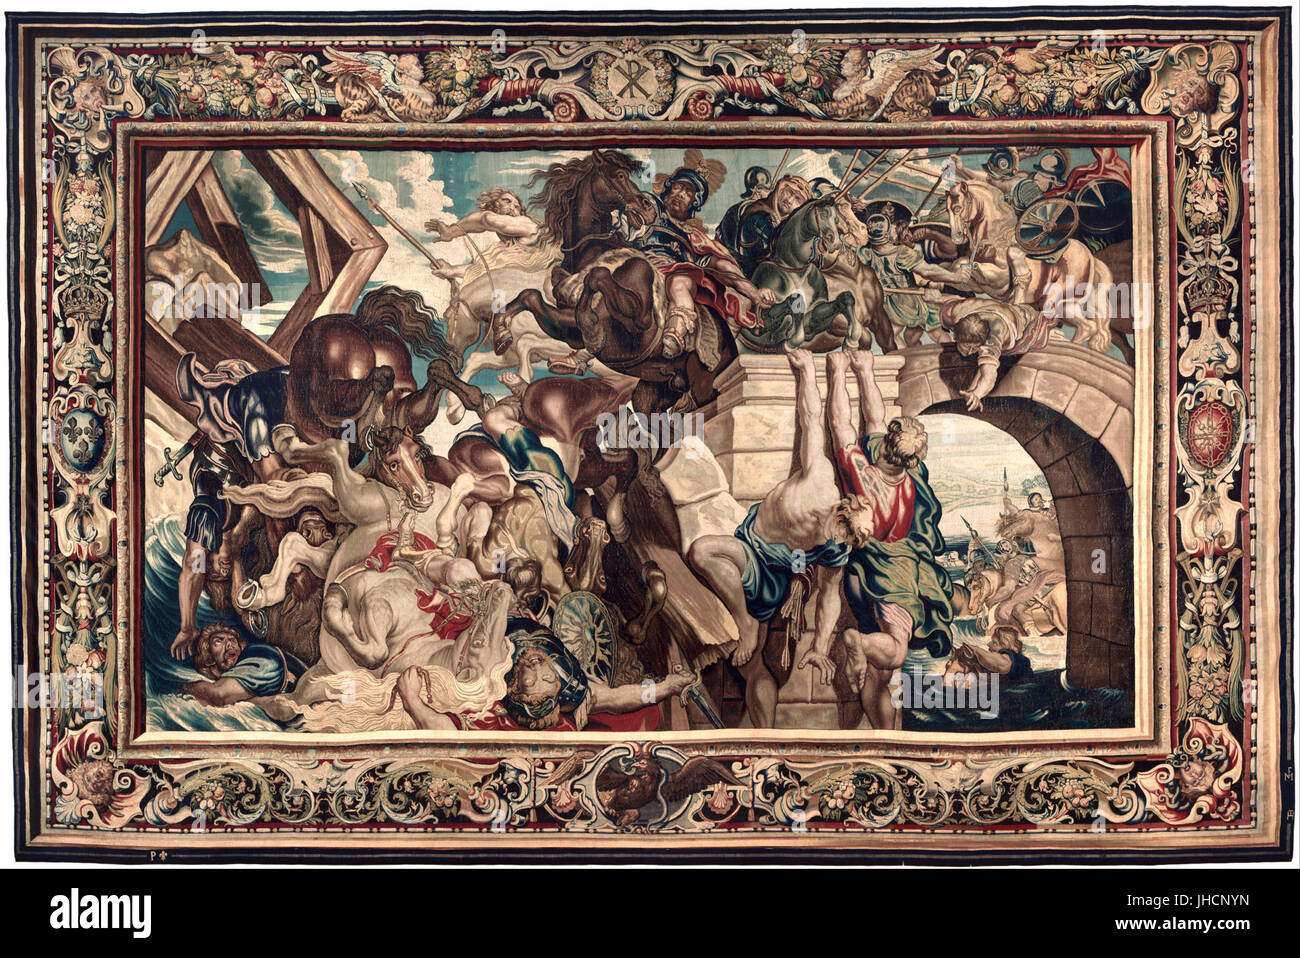 Figural composition designed in 1622 by Peter Paul Rubens - Tapestry showing the Triumph of Constantine over Maxentius at the Battle of the Milvian Bridge - Stock Photo